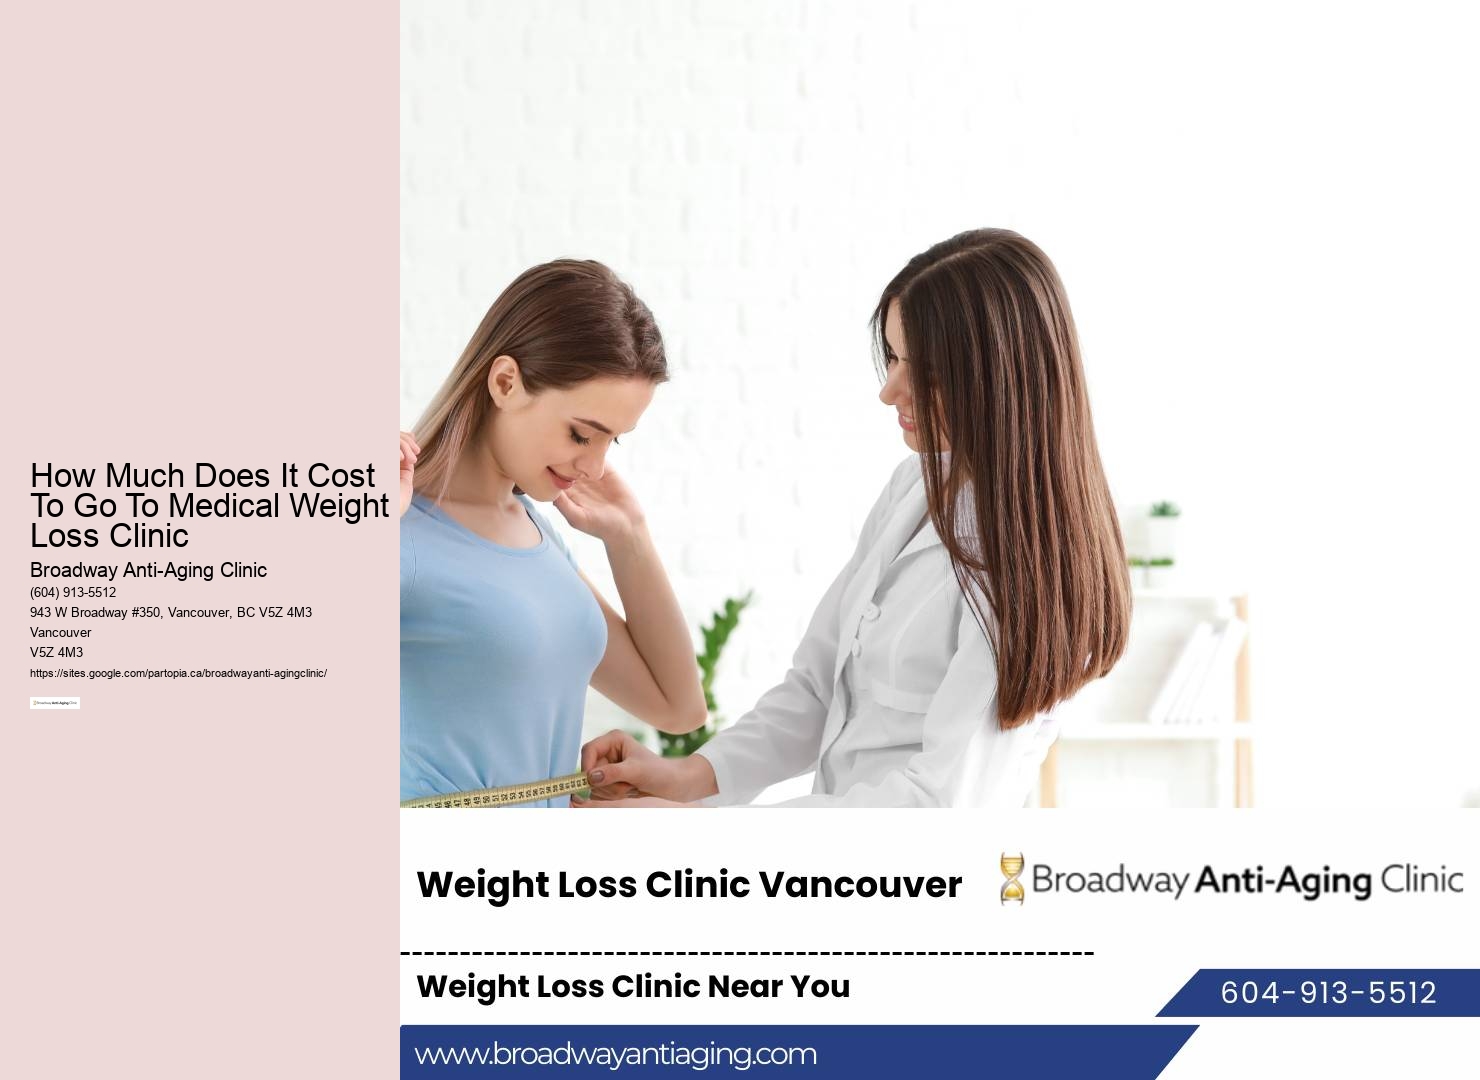 How Much Does It Cost To Go To Medical Weight Loss Clinic